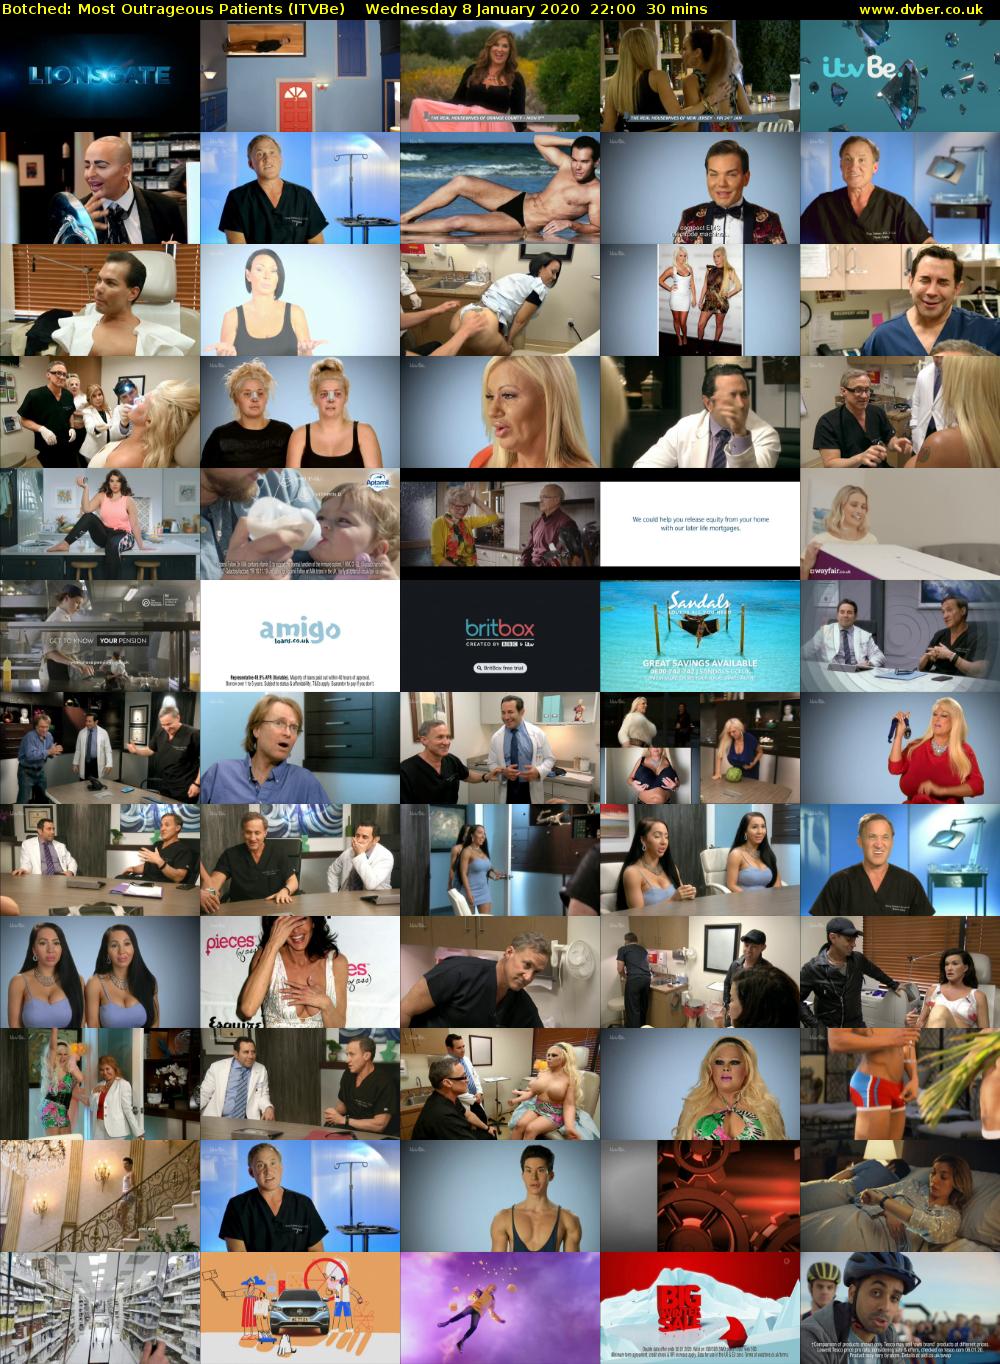 Botched: Most Outrageous Patients (ITVBe) Wednesday 8 January 2020 22:00 - 22:30